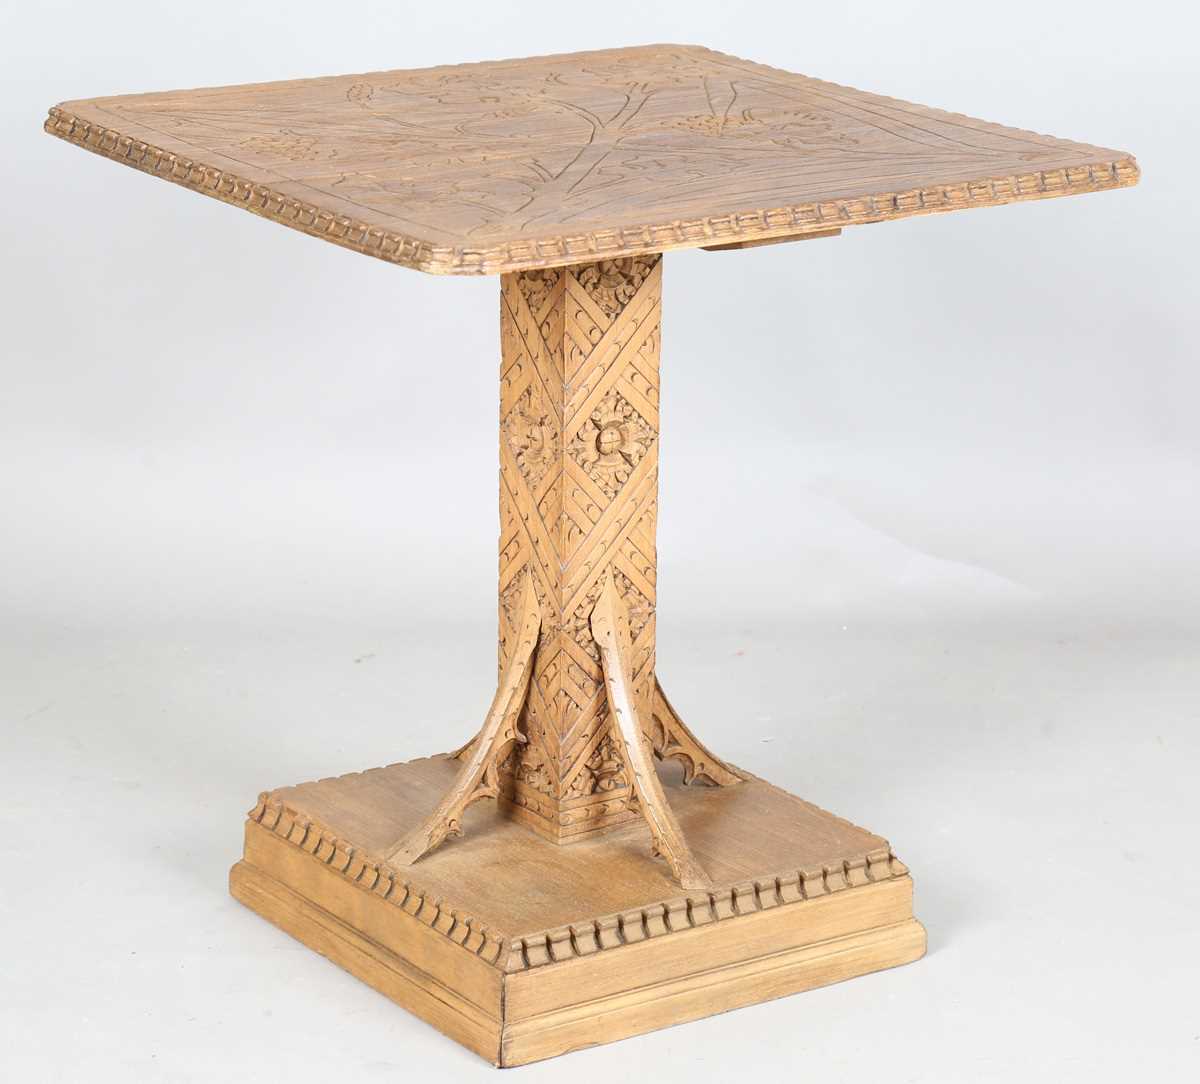 A 20th century Arts and Crafts style carved softwood centre table, the top decorated with wheat